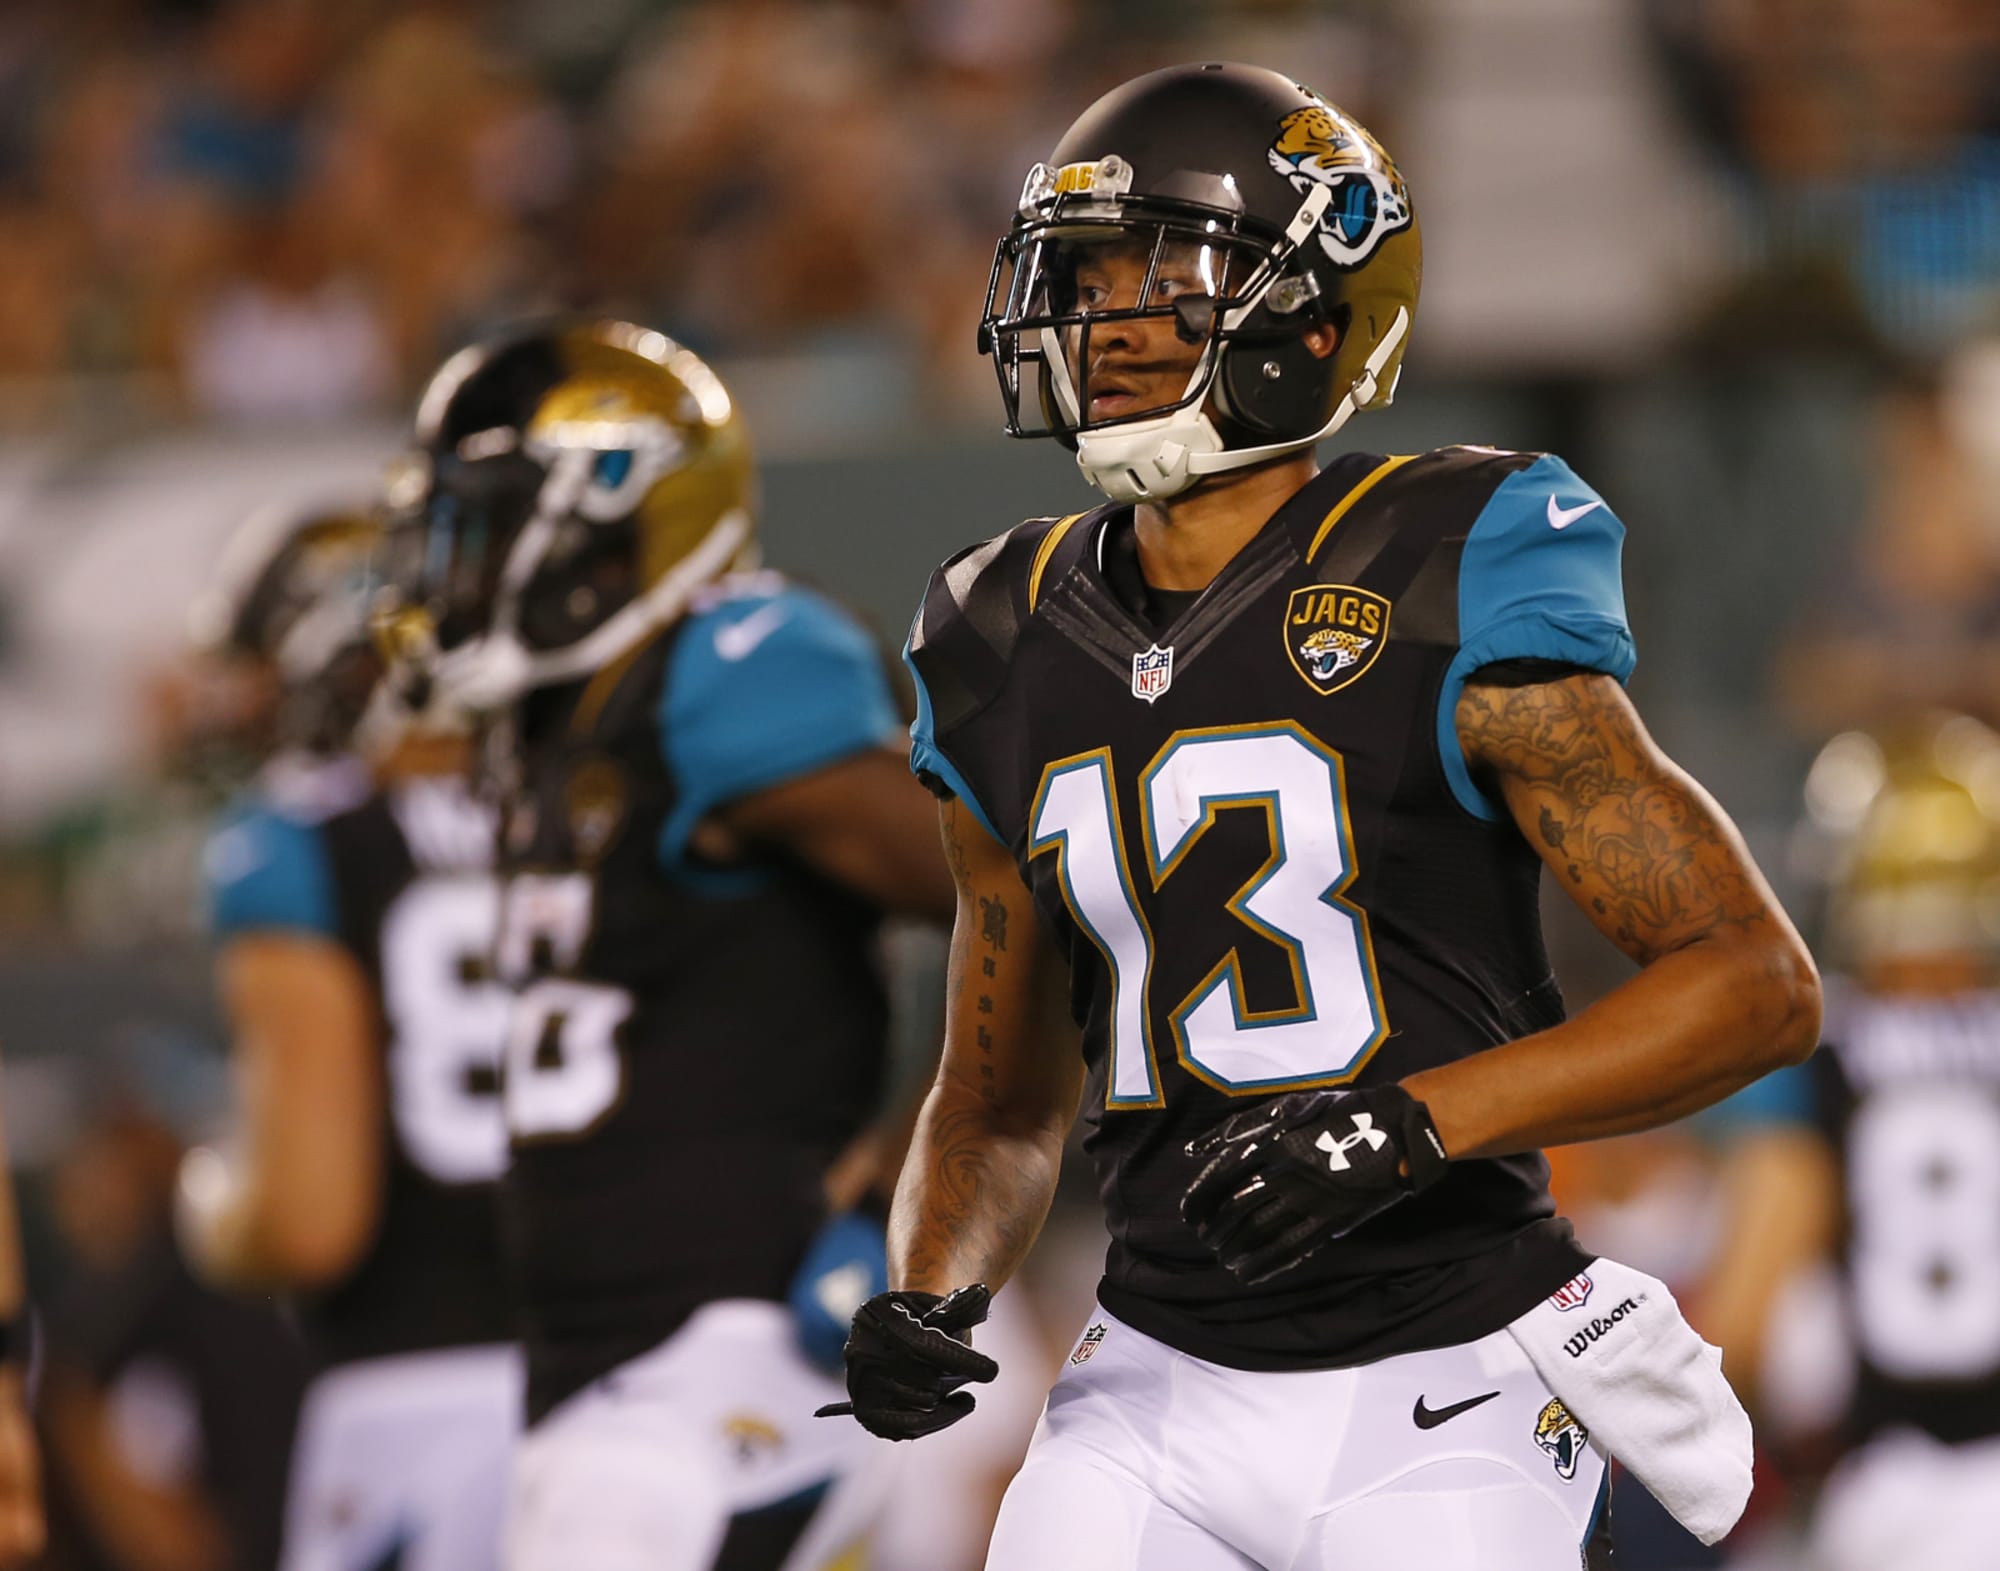 Wide Receiver Rashad Greene Re-Signed by the Jacksonville Jaguars